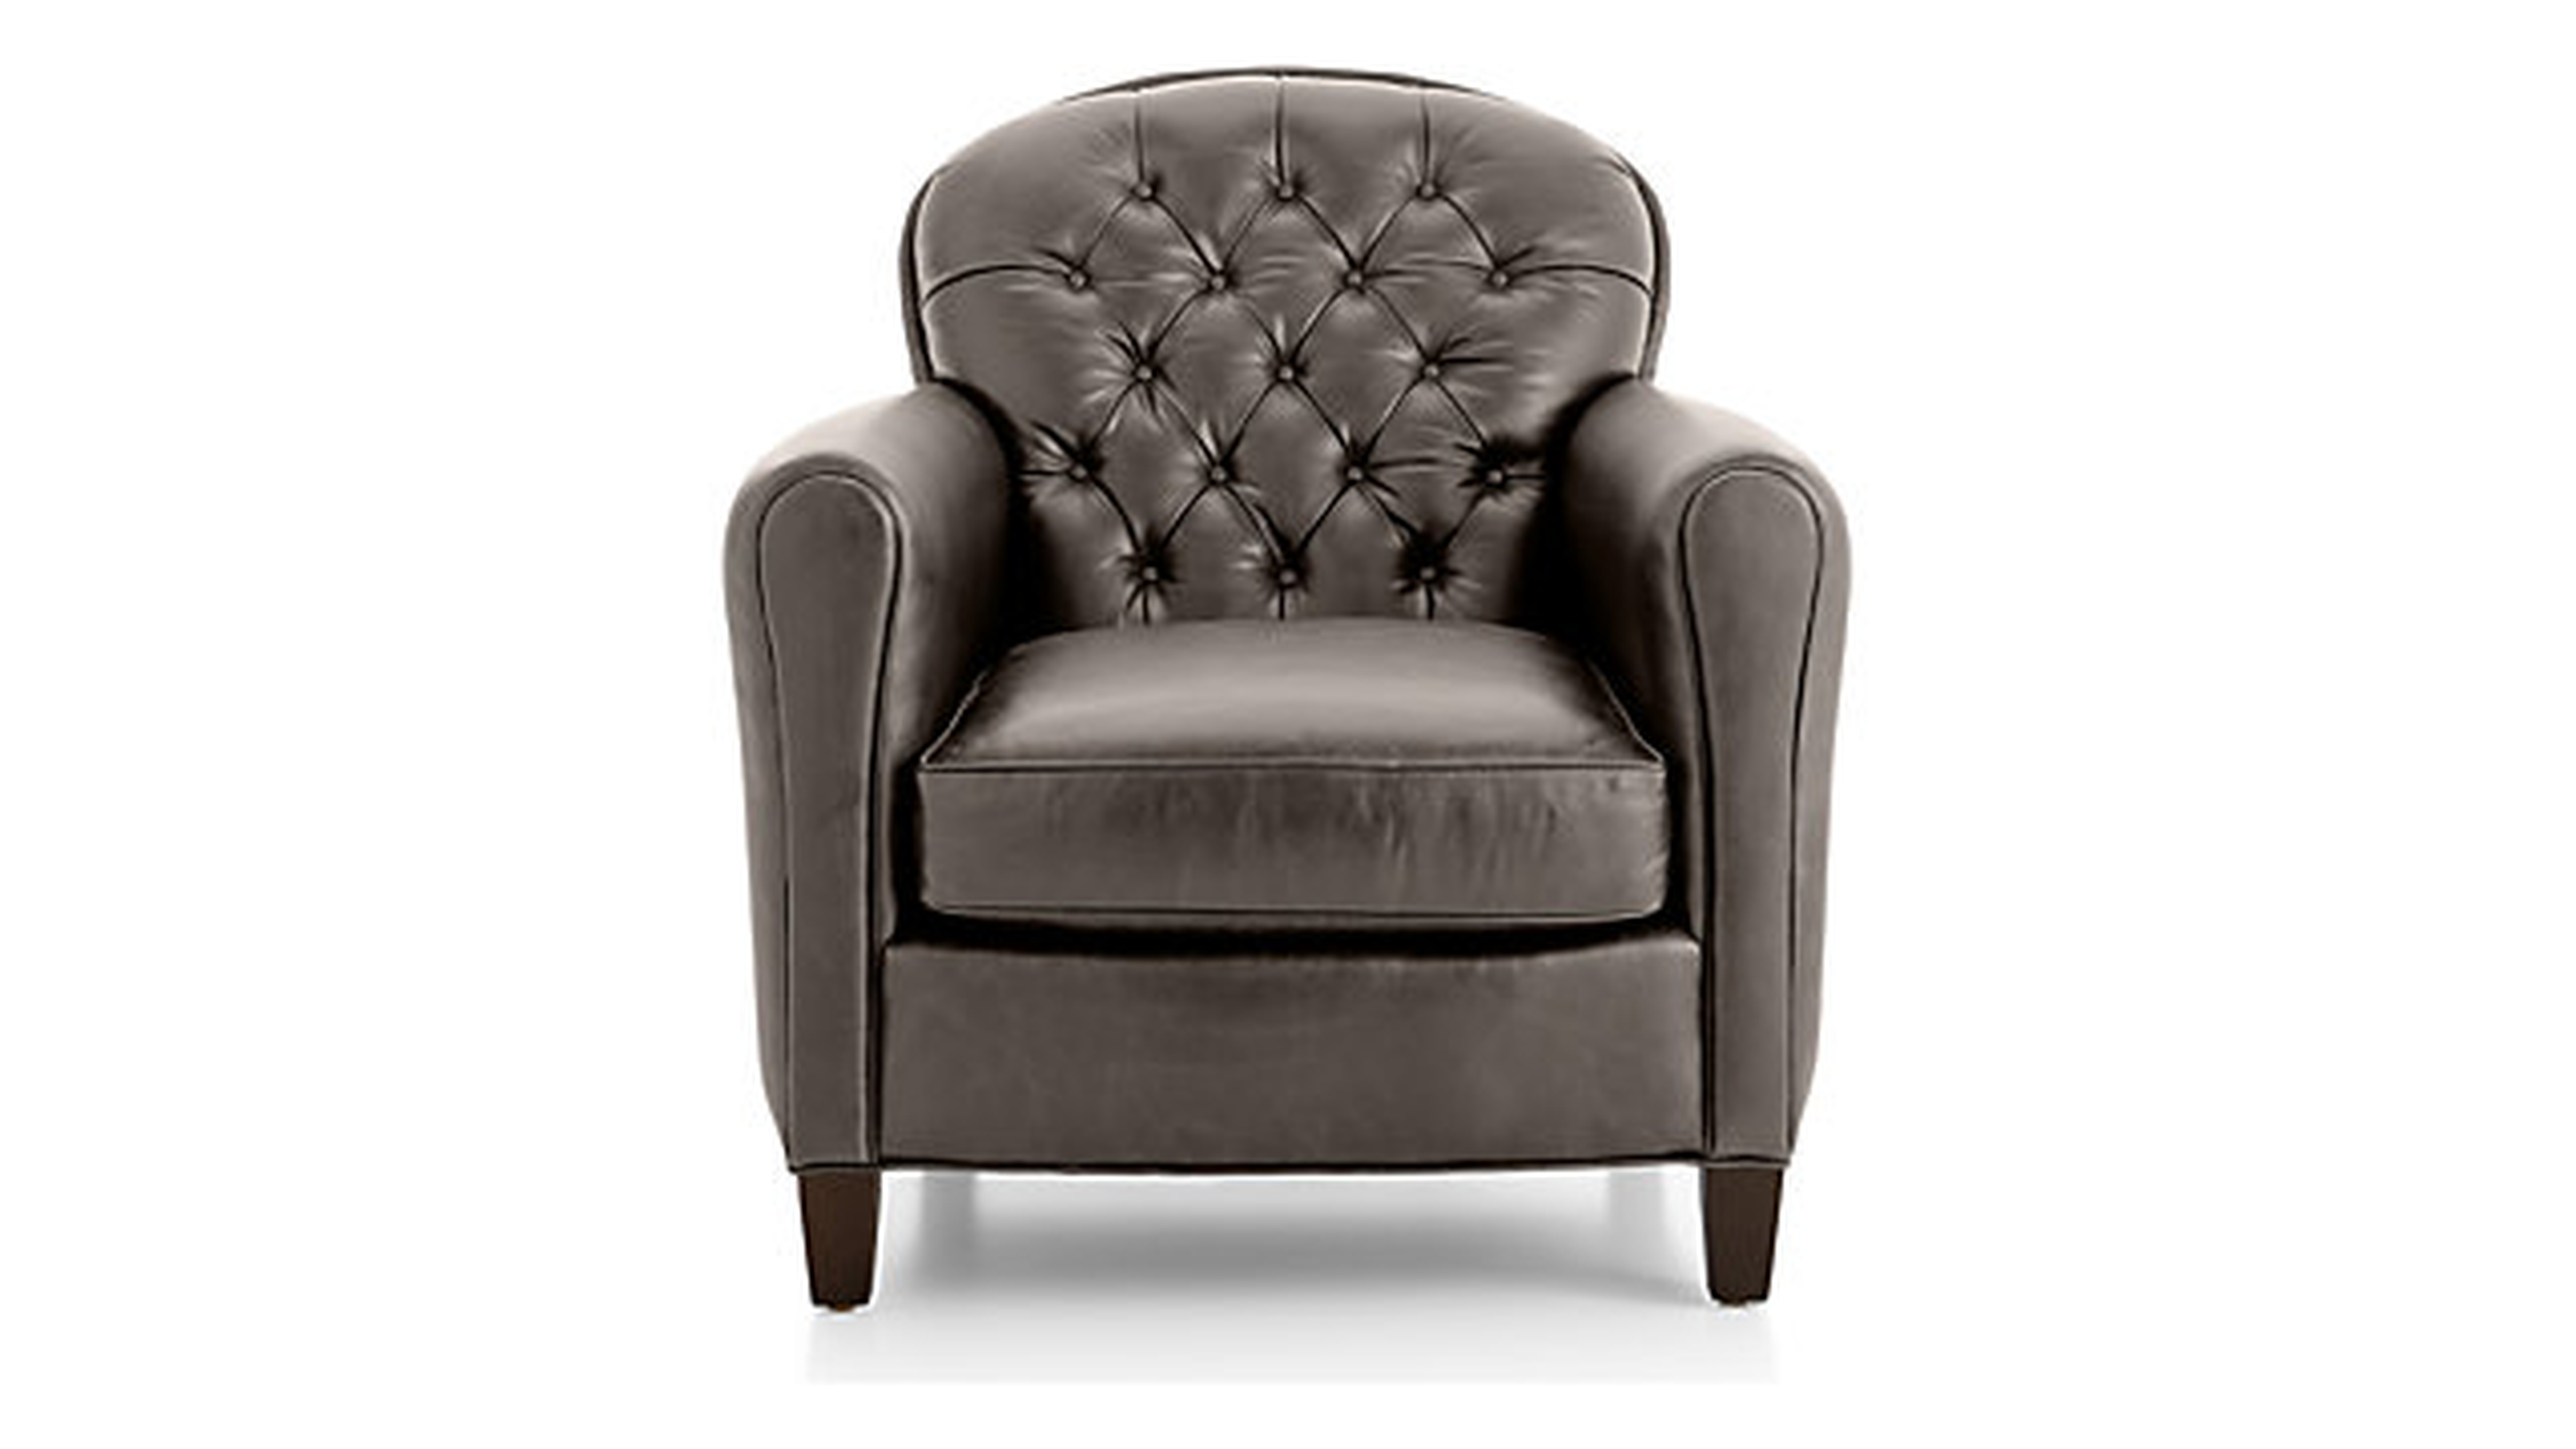 Eiffel Tufted Leather Chair / Tampa, Pewter - Crate and Barrel